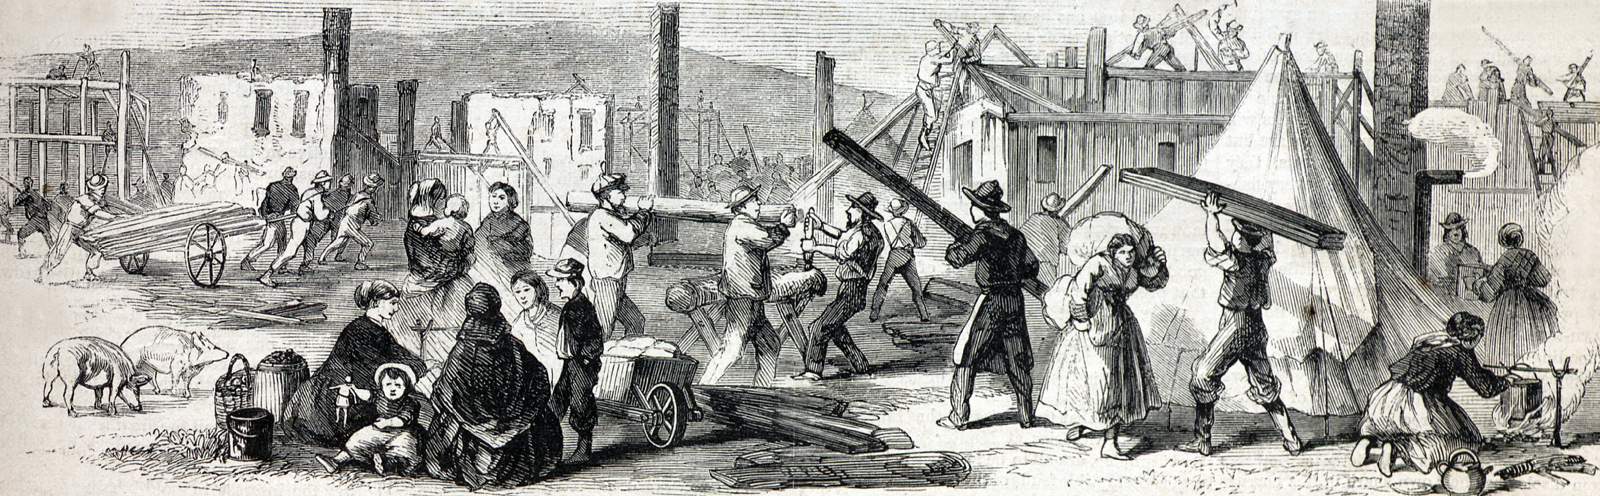 Constructing shelter for the citizens of Quebec made homeless in the great fire of October 14, 1866, artist's impression, zoomable image.